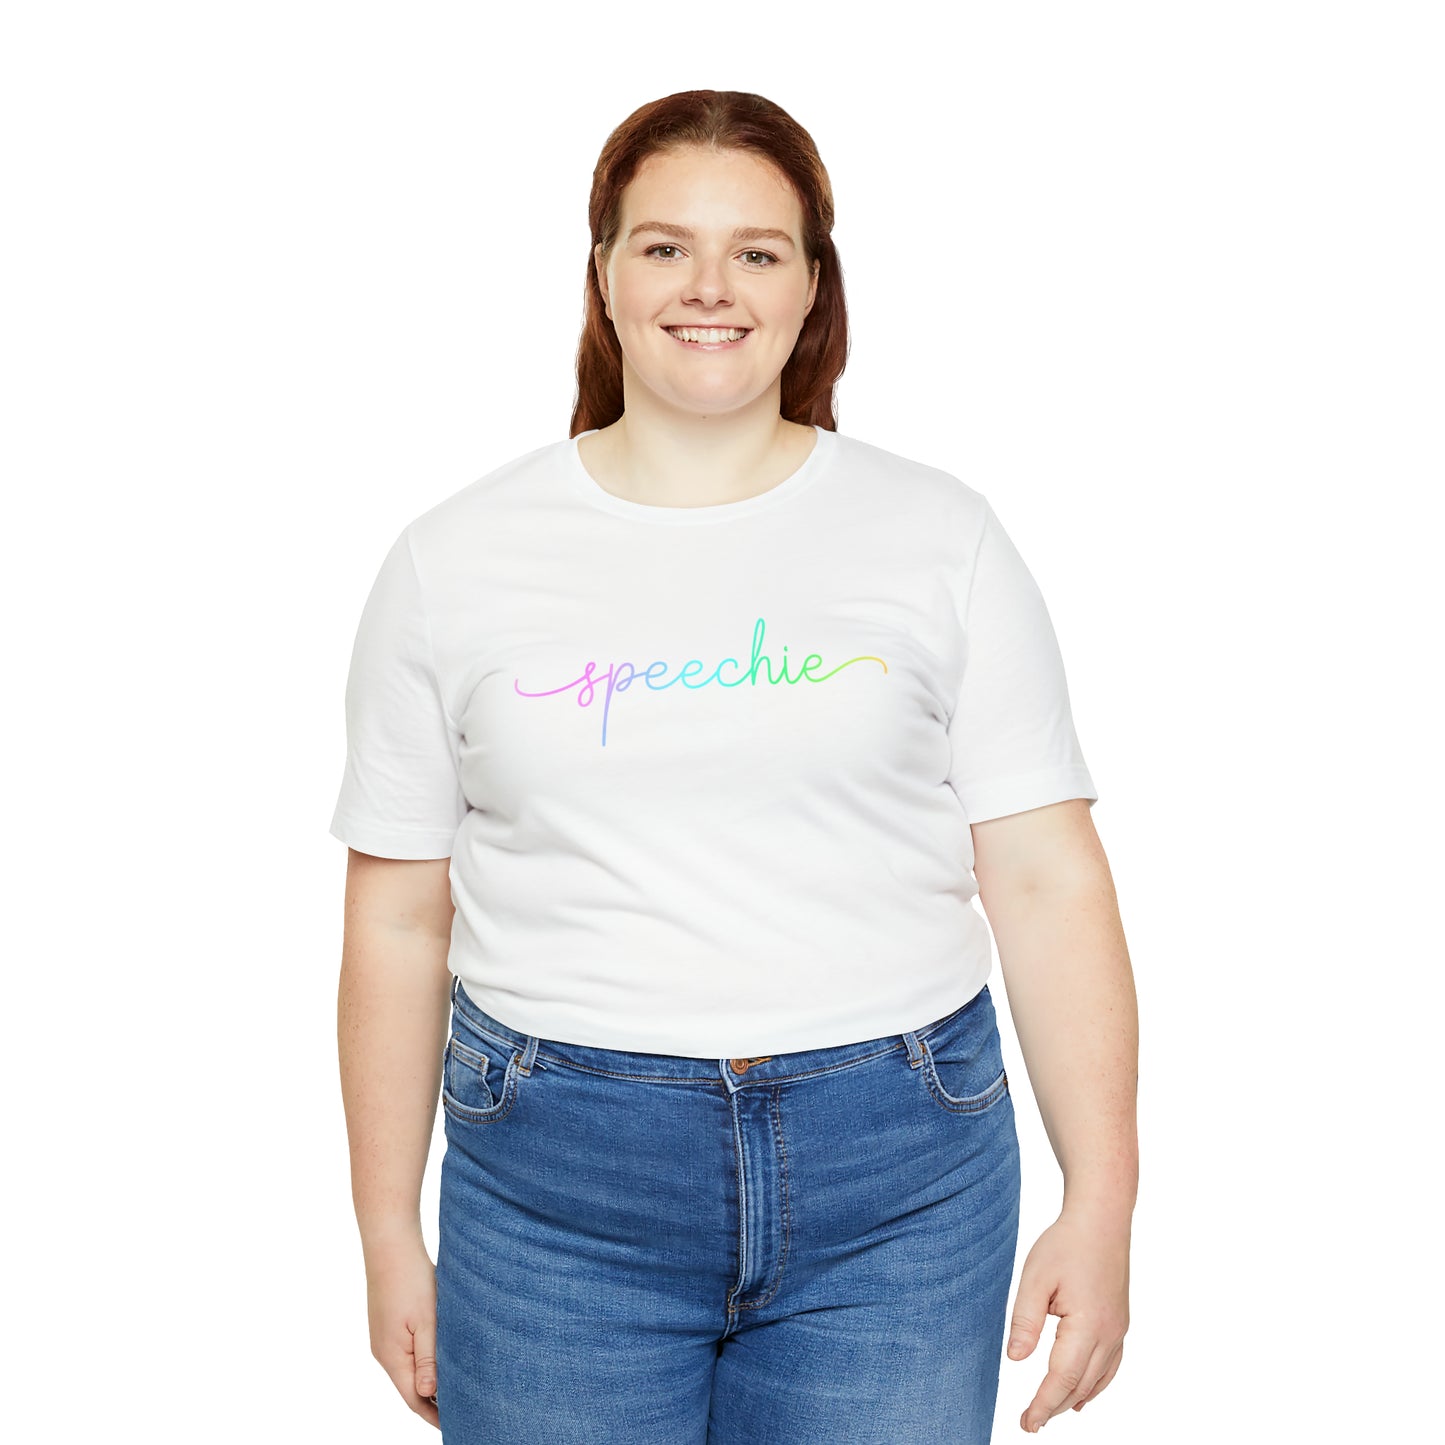 Mommy "Speechie" T-shirt (see link to order matching infant bodysuit separately)